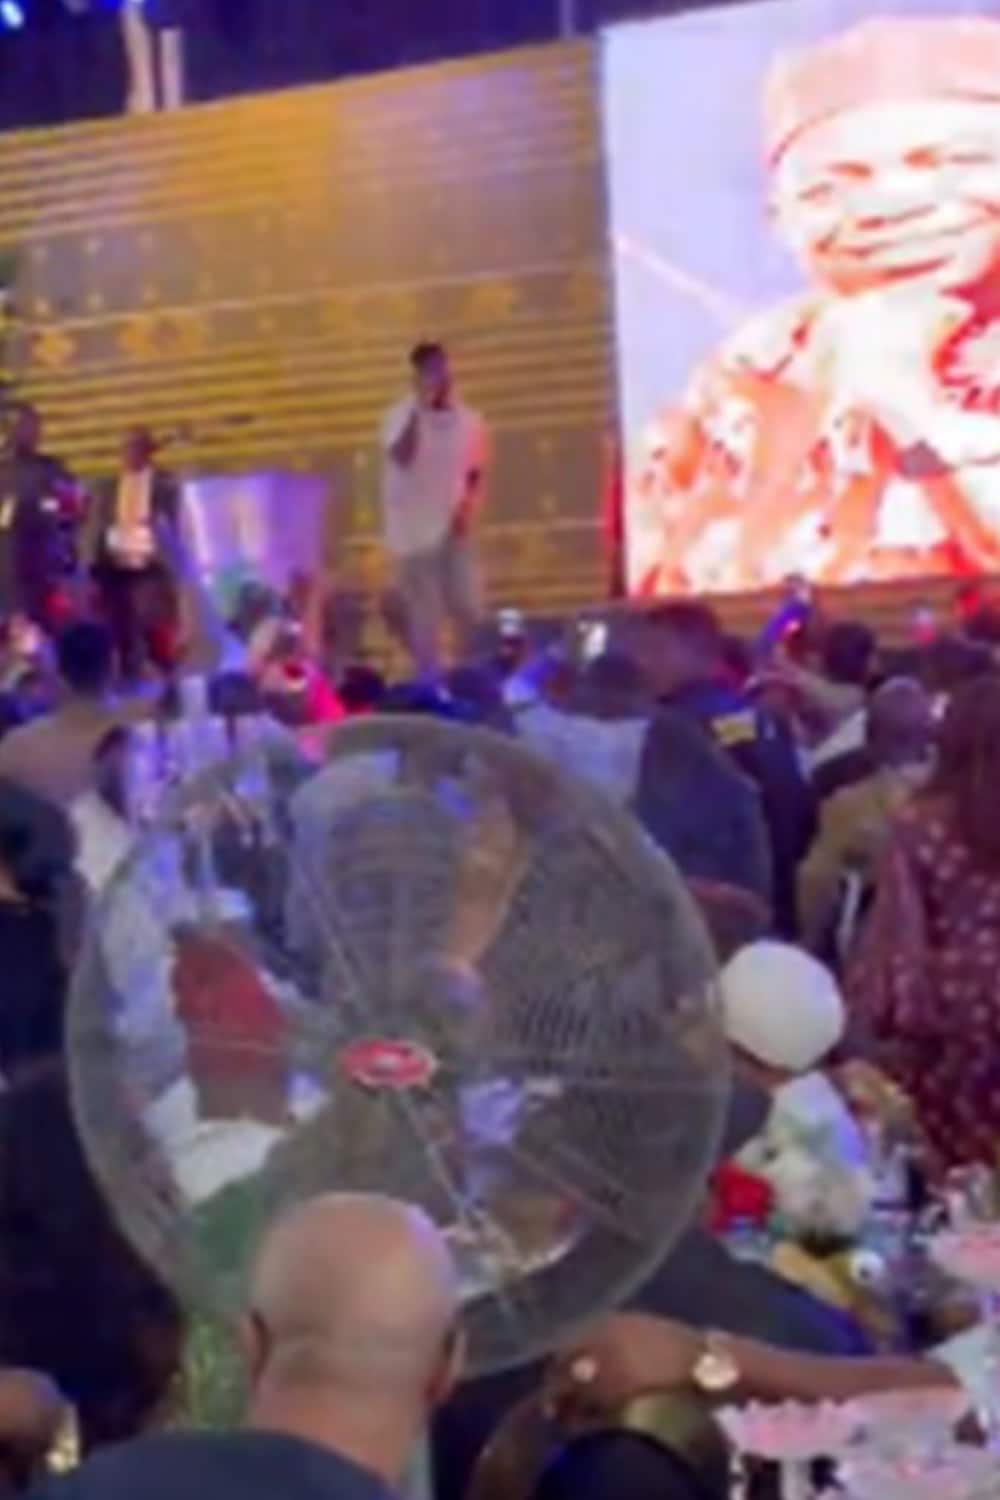 Davido thrills guests at Gov. Alex Otti’s post-inauguration ceremony with electrifying performance (Video)